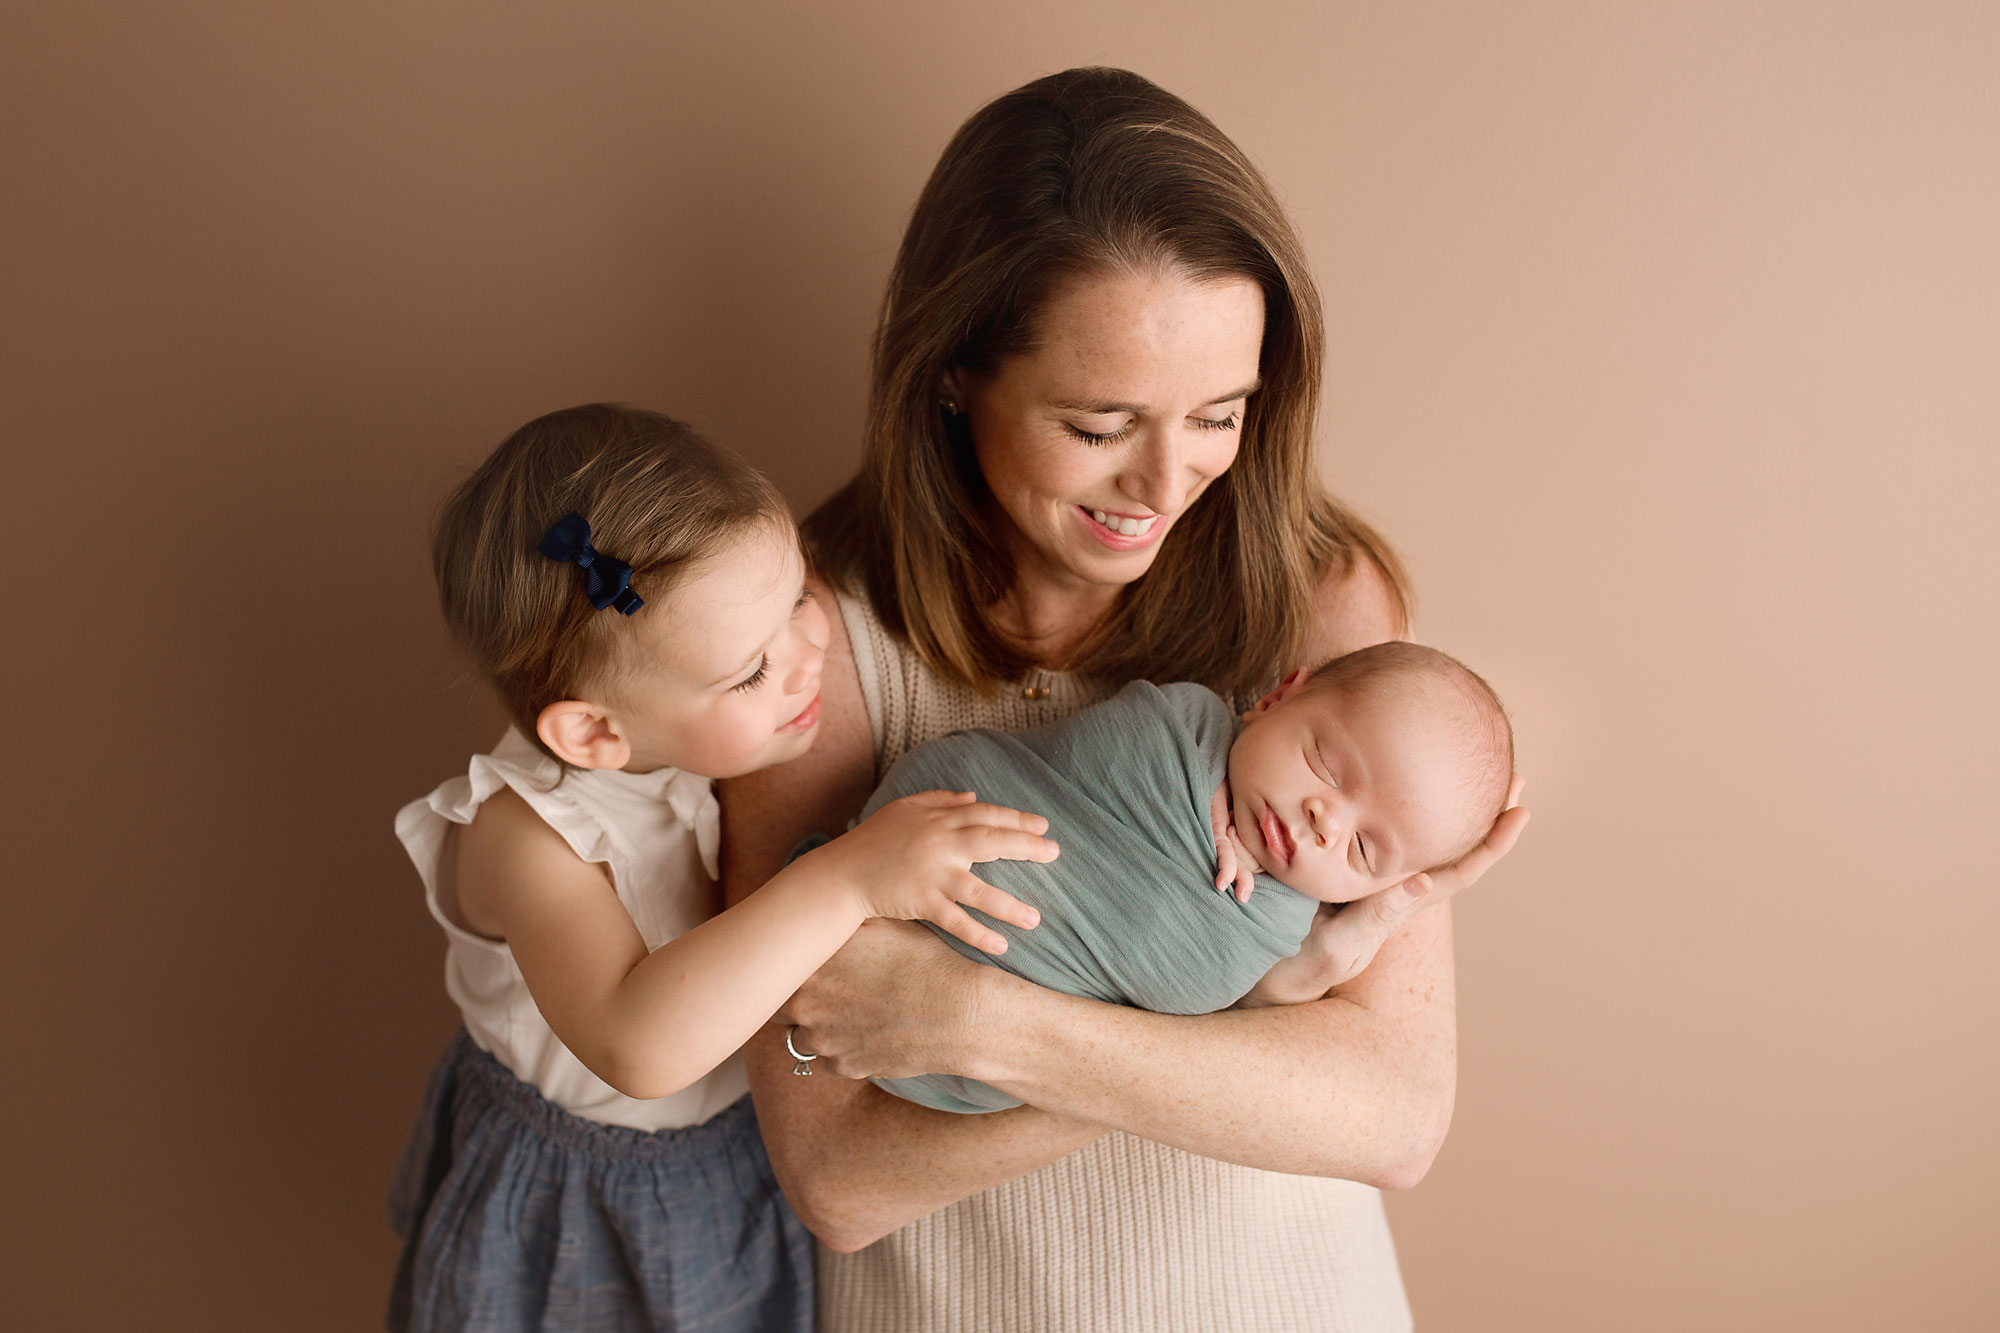 newborn and family pictures new jersey, mom and little girl holding new baby boy